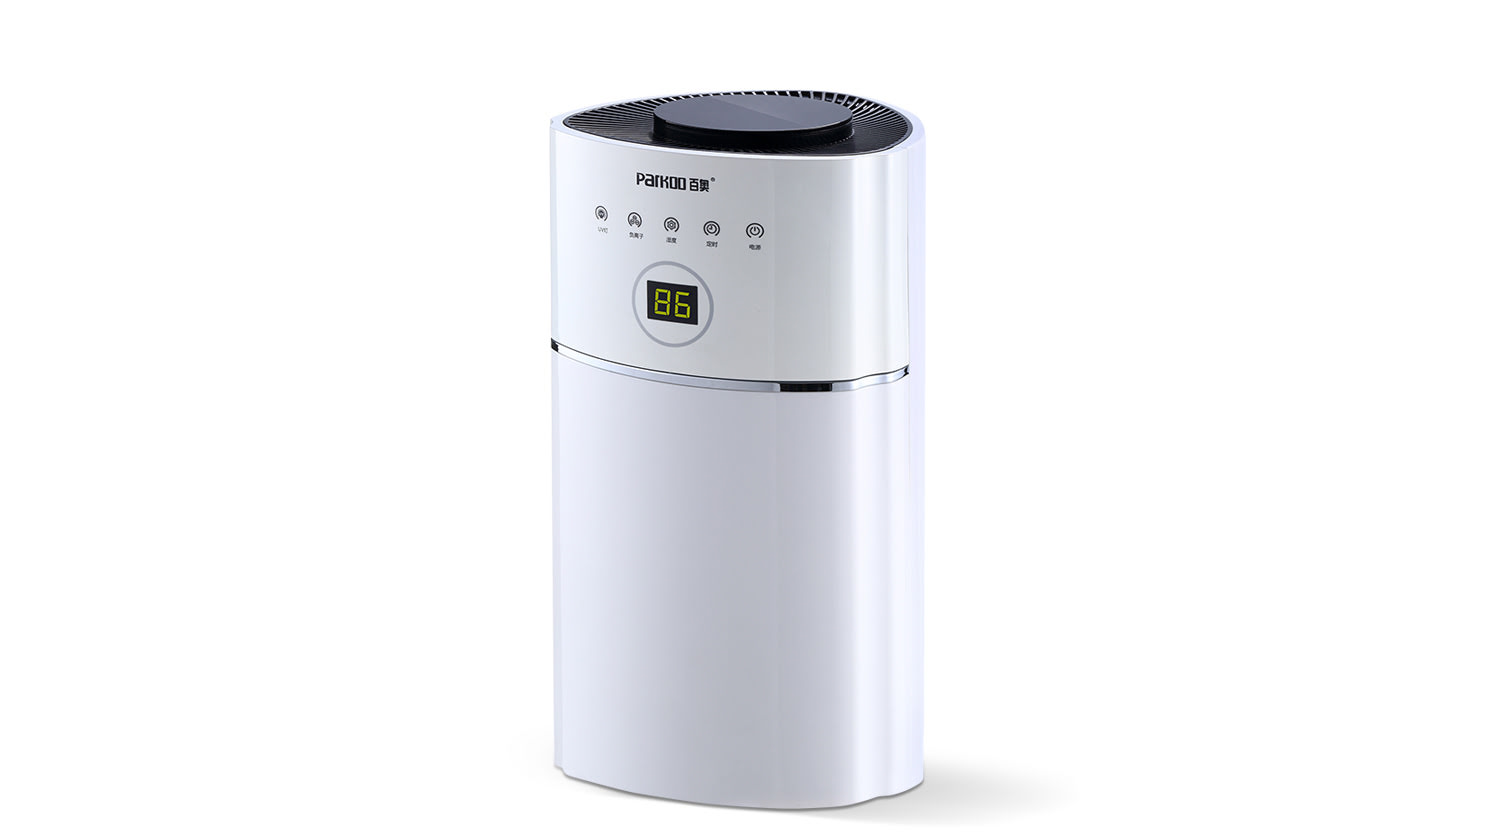 Industrial Dehumidifier creates a comfortable indoor environment for offices and schools